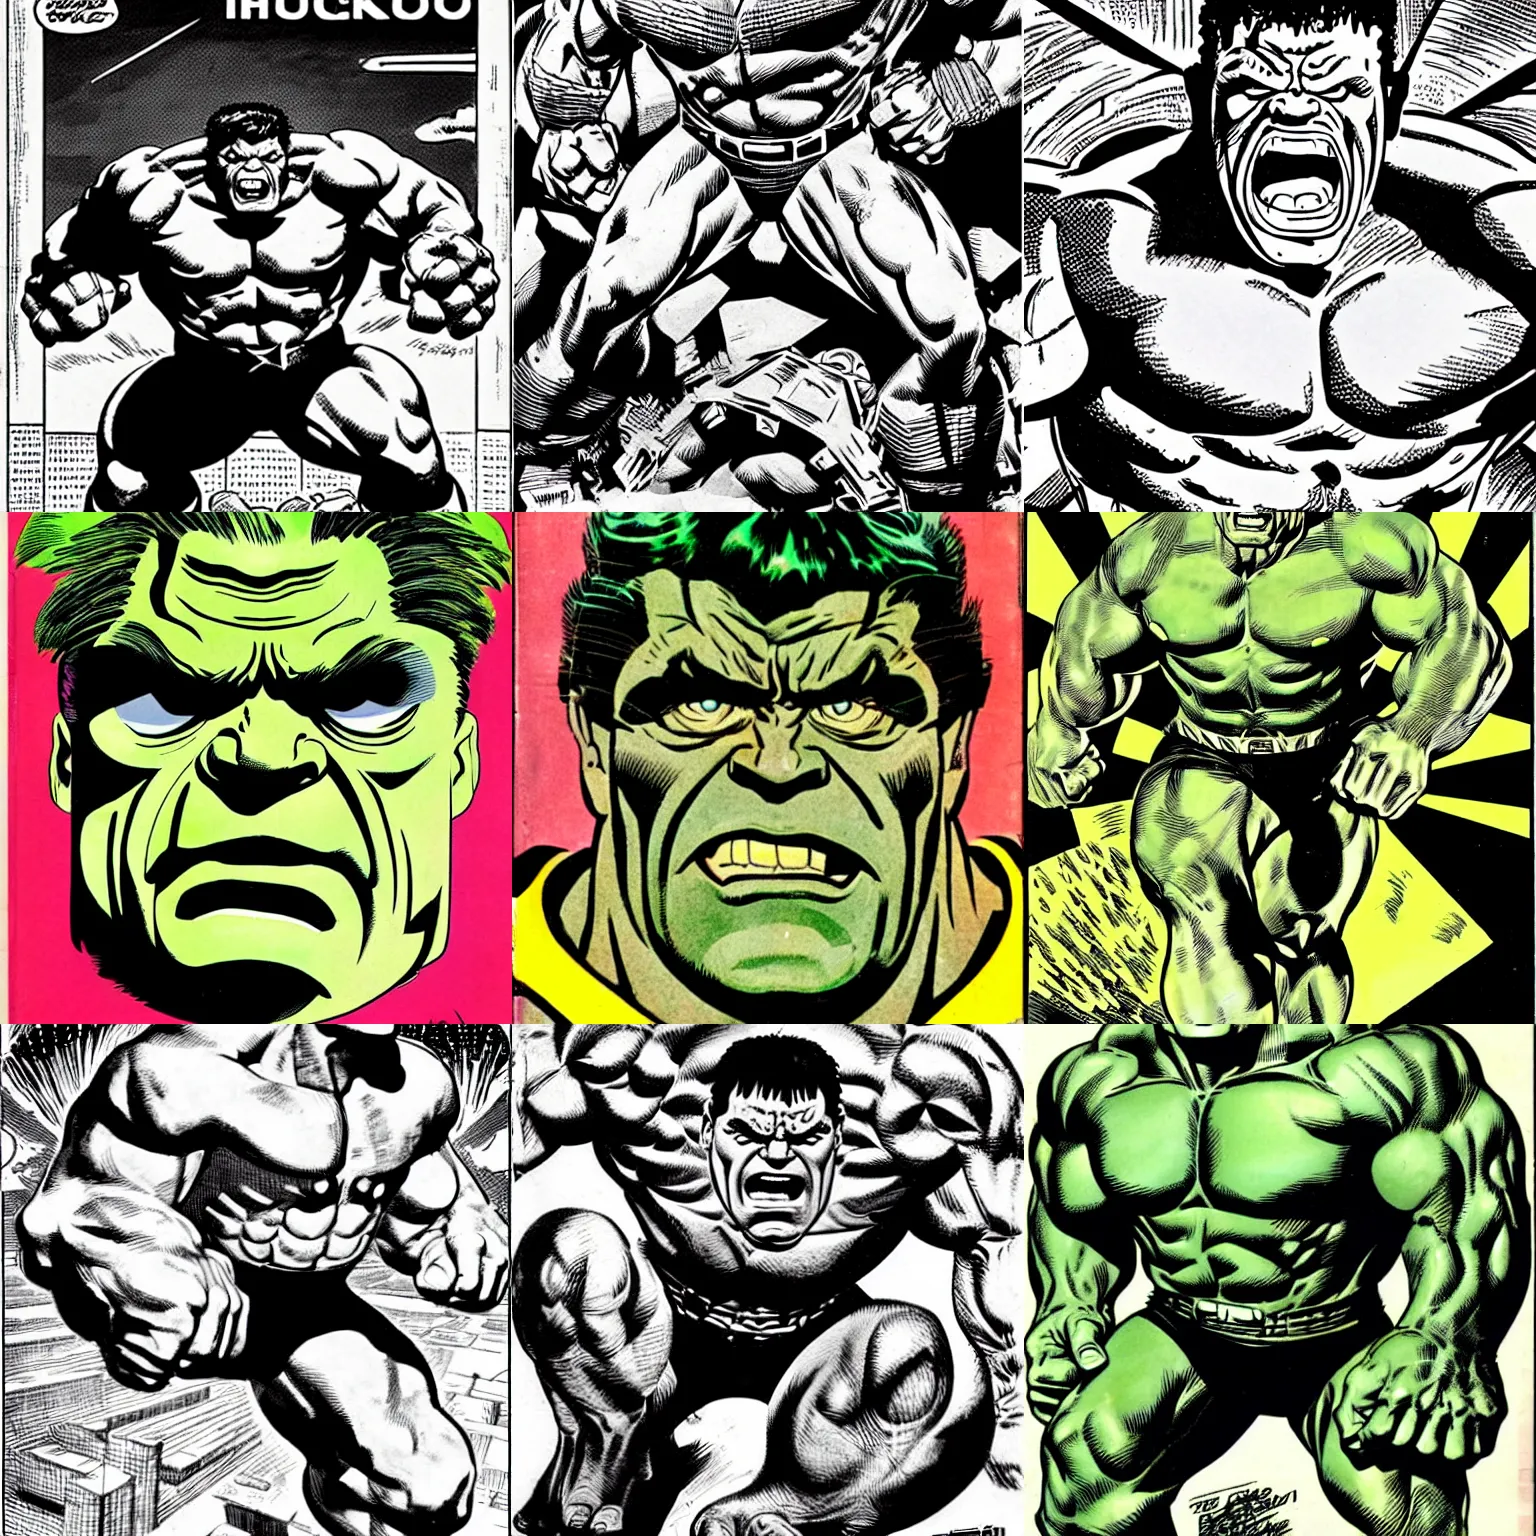 Prompt: by jack kirby comic book macro face of hulk